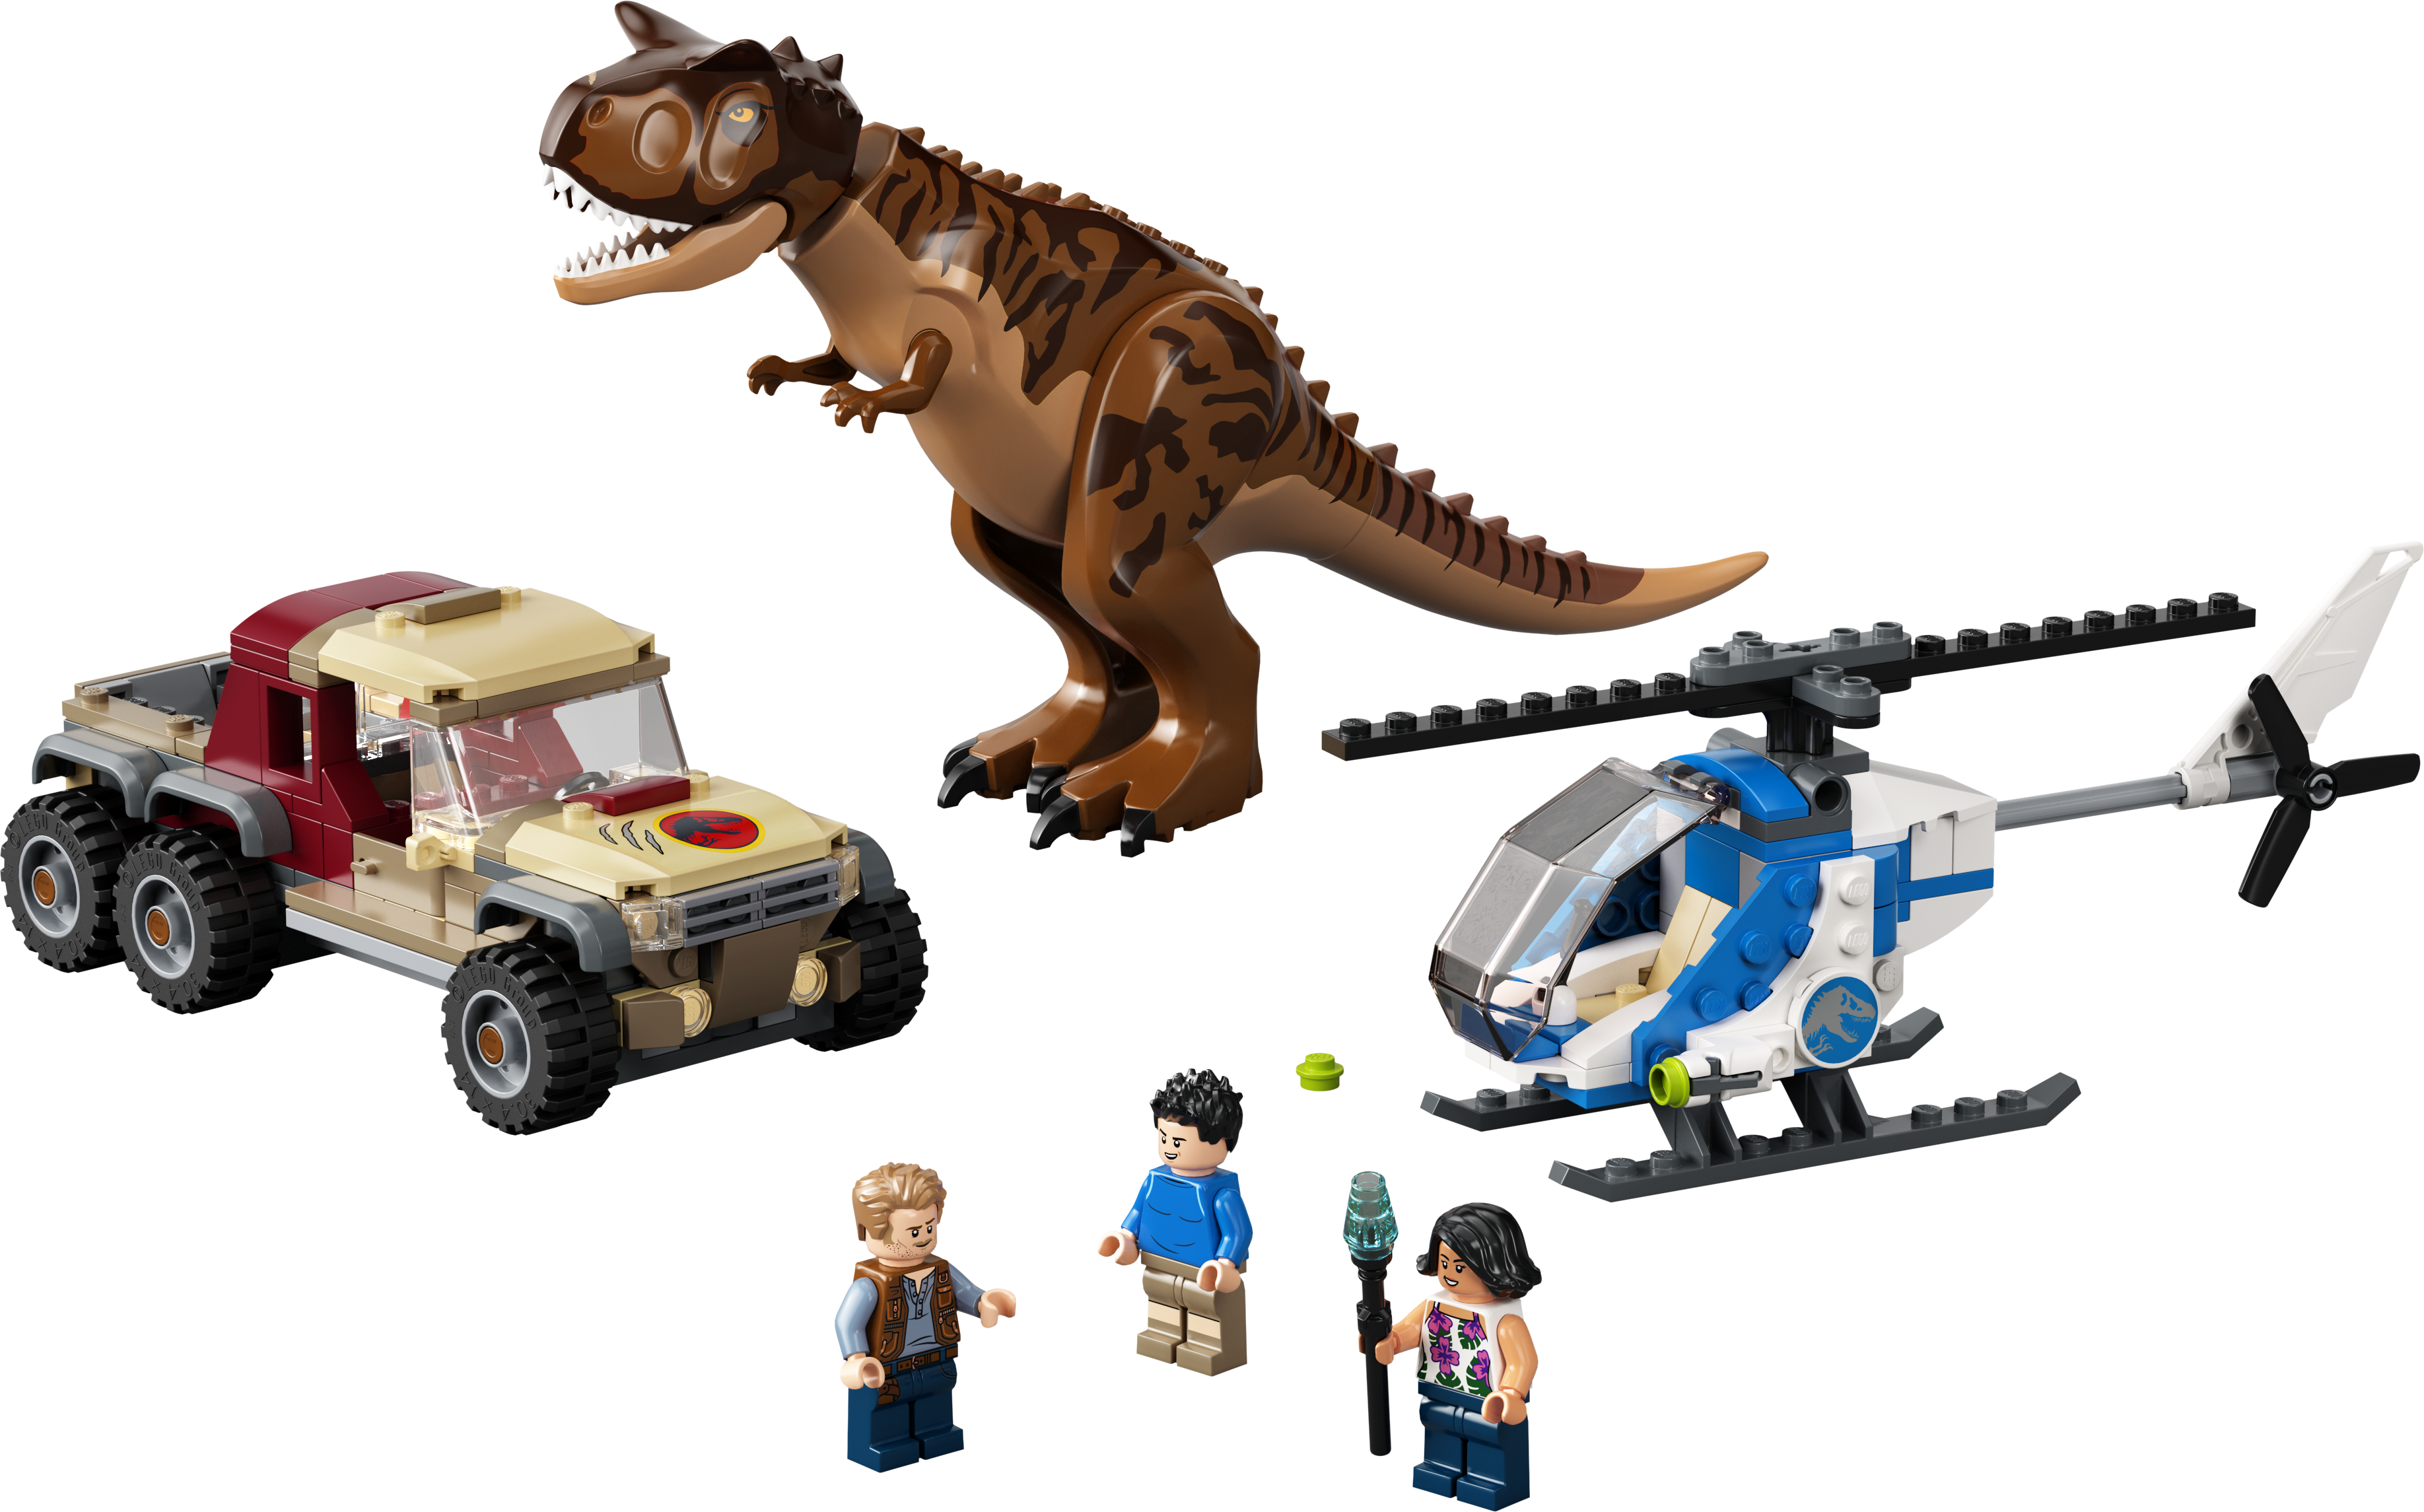 niece Feasibility Admission fee Dinosaurs | Animals | Official LEGO® Shop US